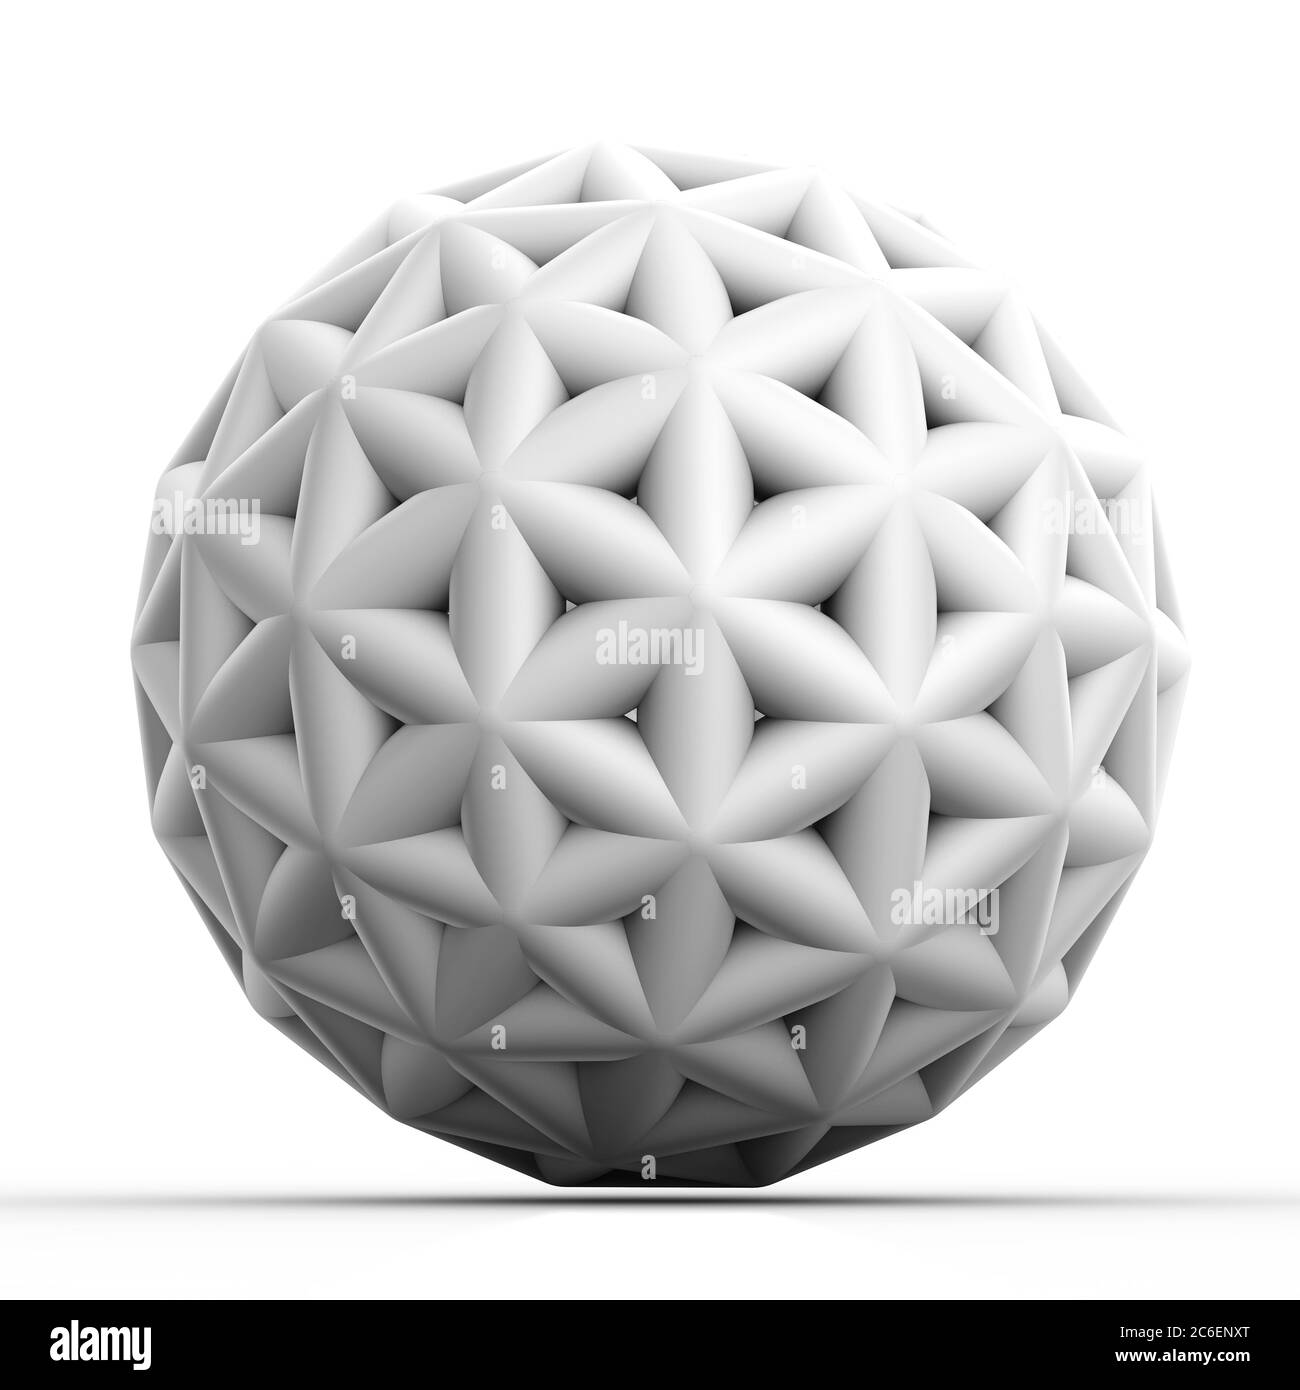 Geometric 3D object on white mathematical construction Stock Photo